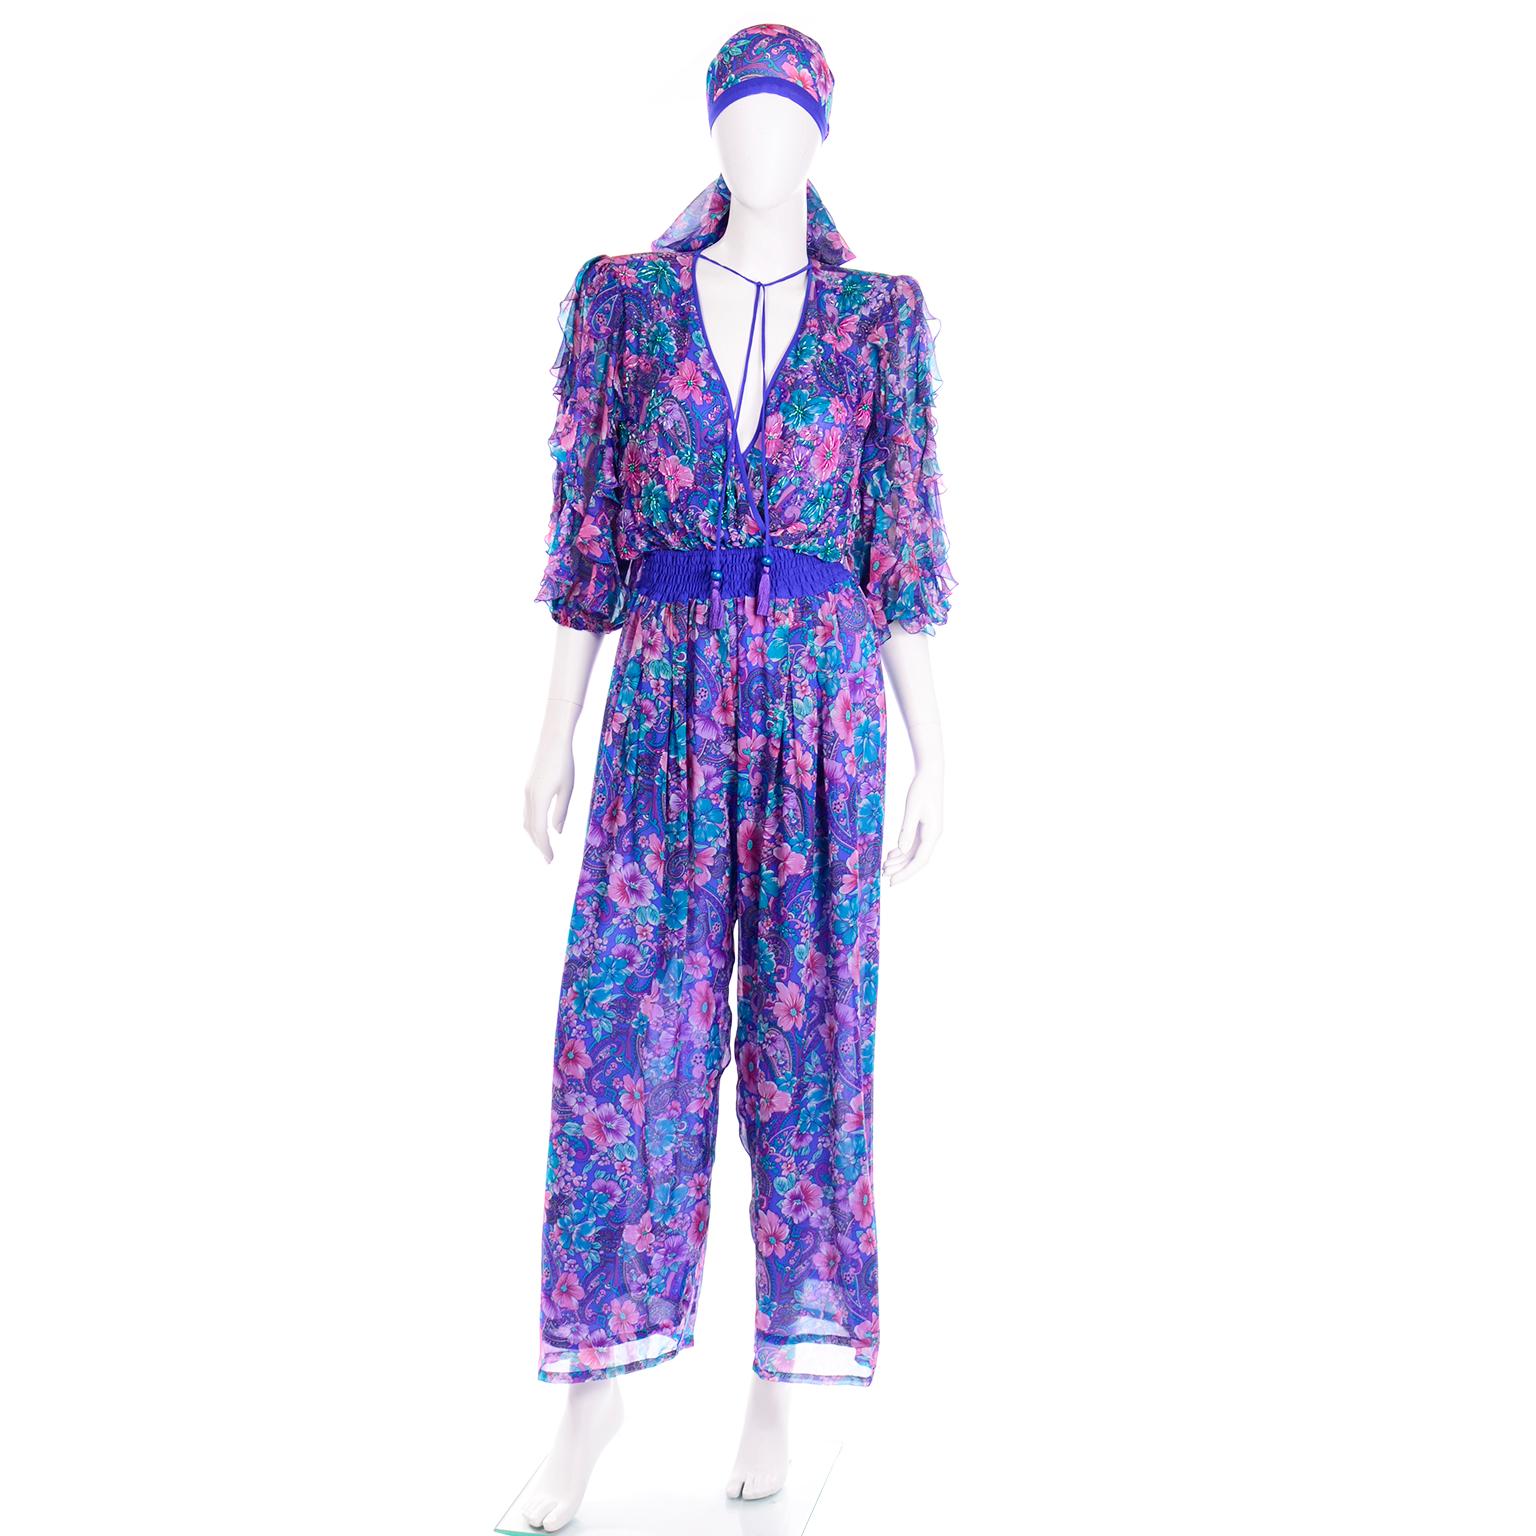 This Diane Freis floral silk and beaded jumpsuit is so gorgeous! This floral printed silk is in stunning tones of blue, teal, pink, purple, lavender, and white. We love that the front of the bust is beaded, making this a perfect Spring or Summer